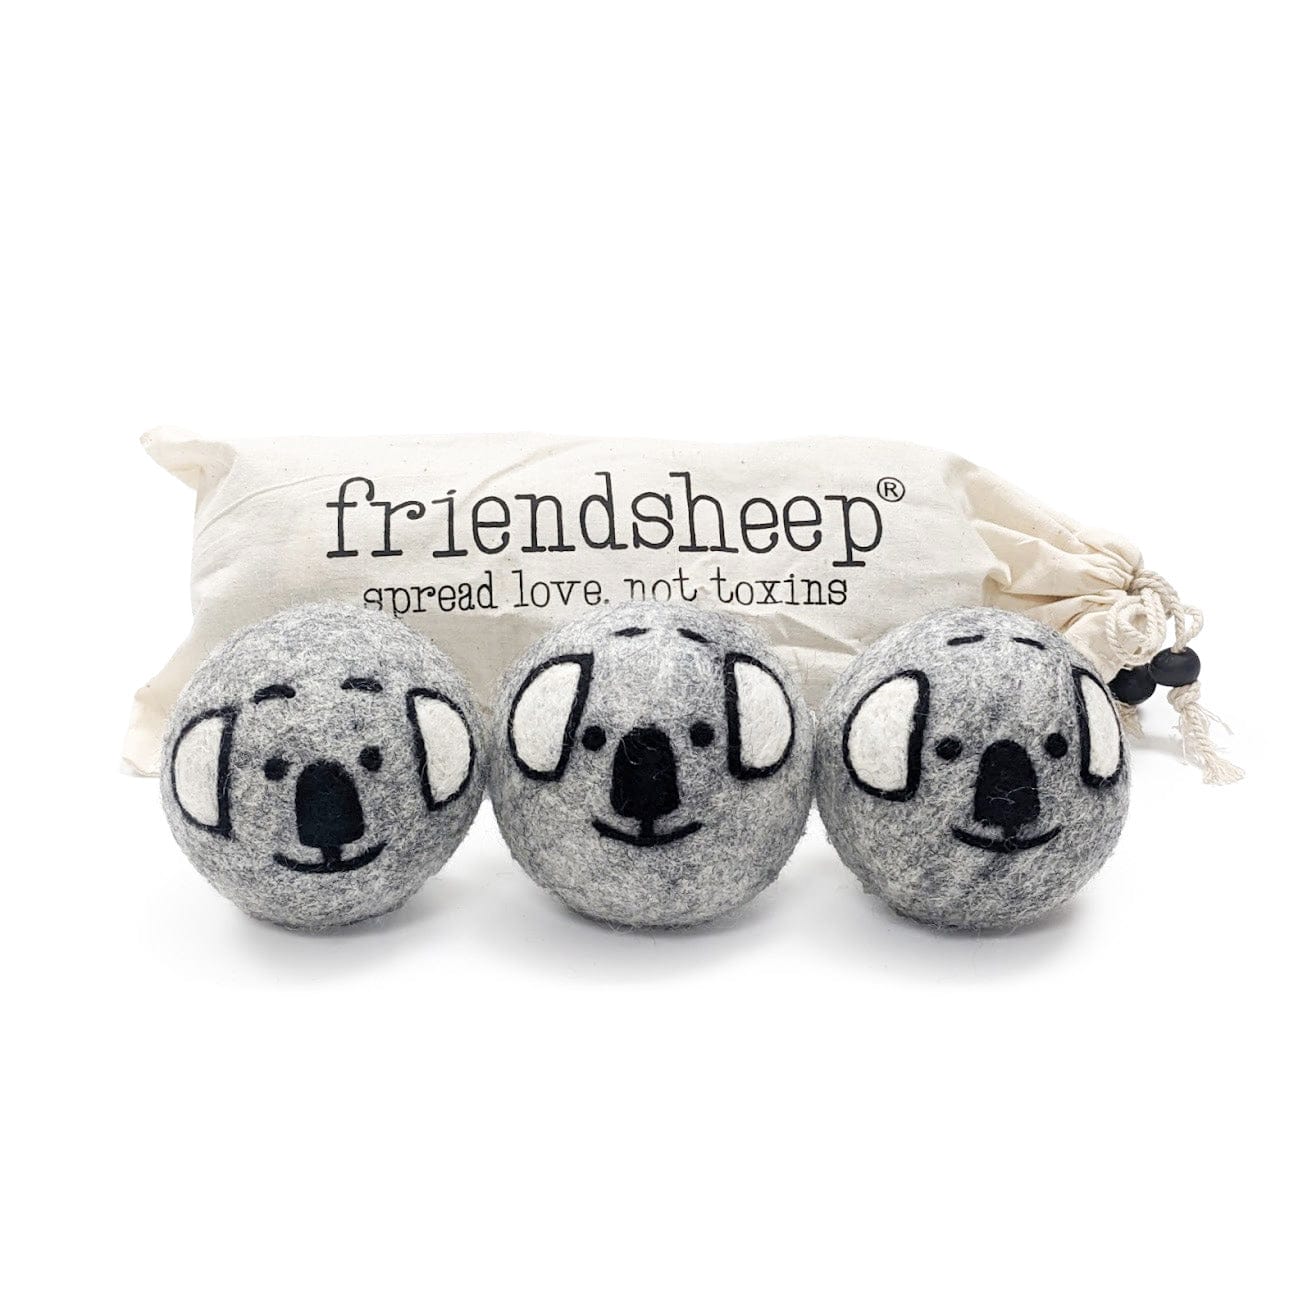 Image of Cuddly Koalas - Limited Edition f mendsheep read love. not toxins A, 